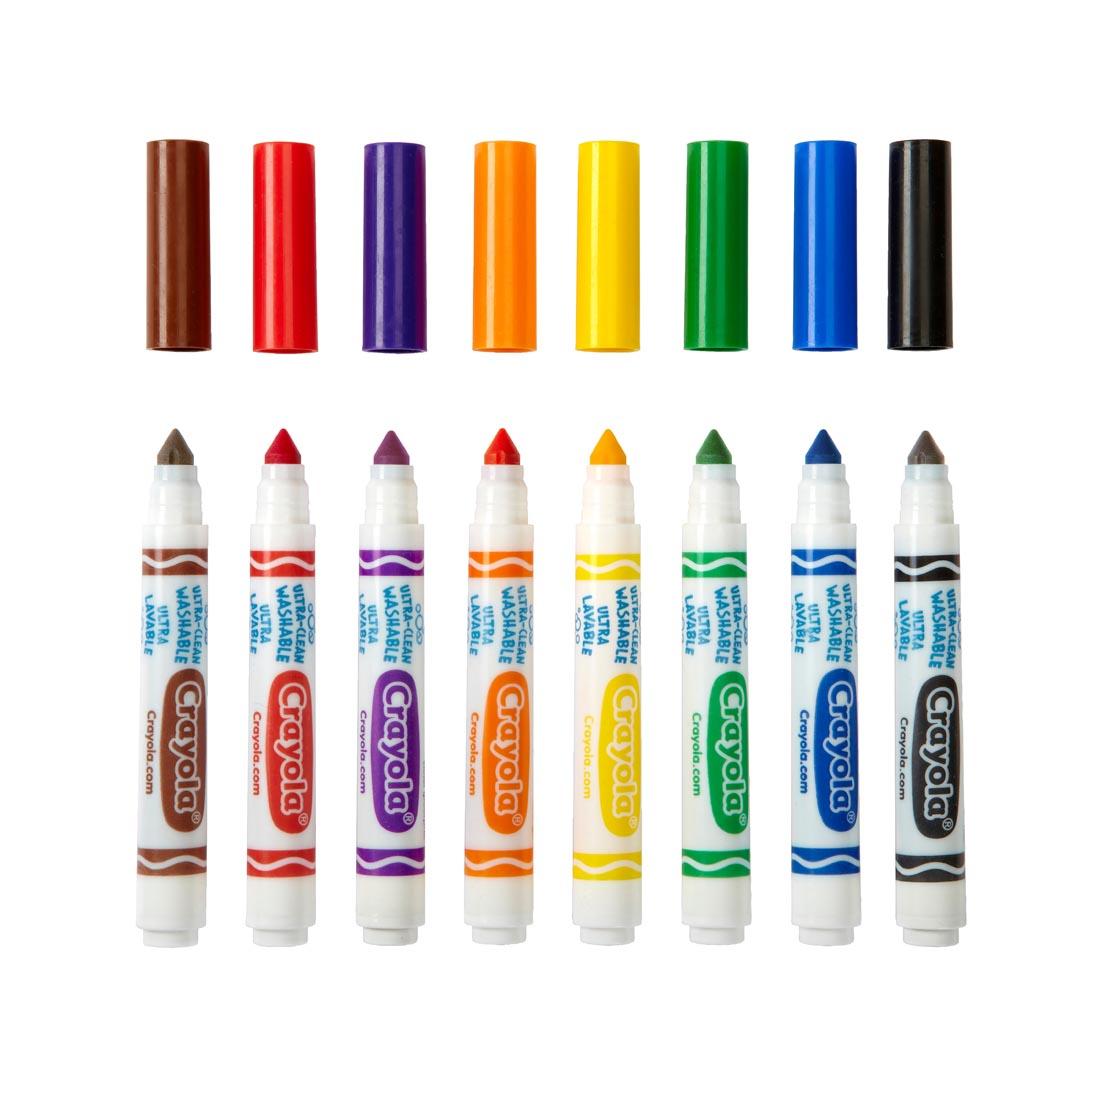 Crayola Ultra-Clean Washable Broad Line Markers in 8 colors with caps off